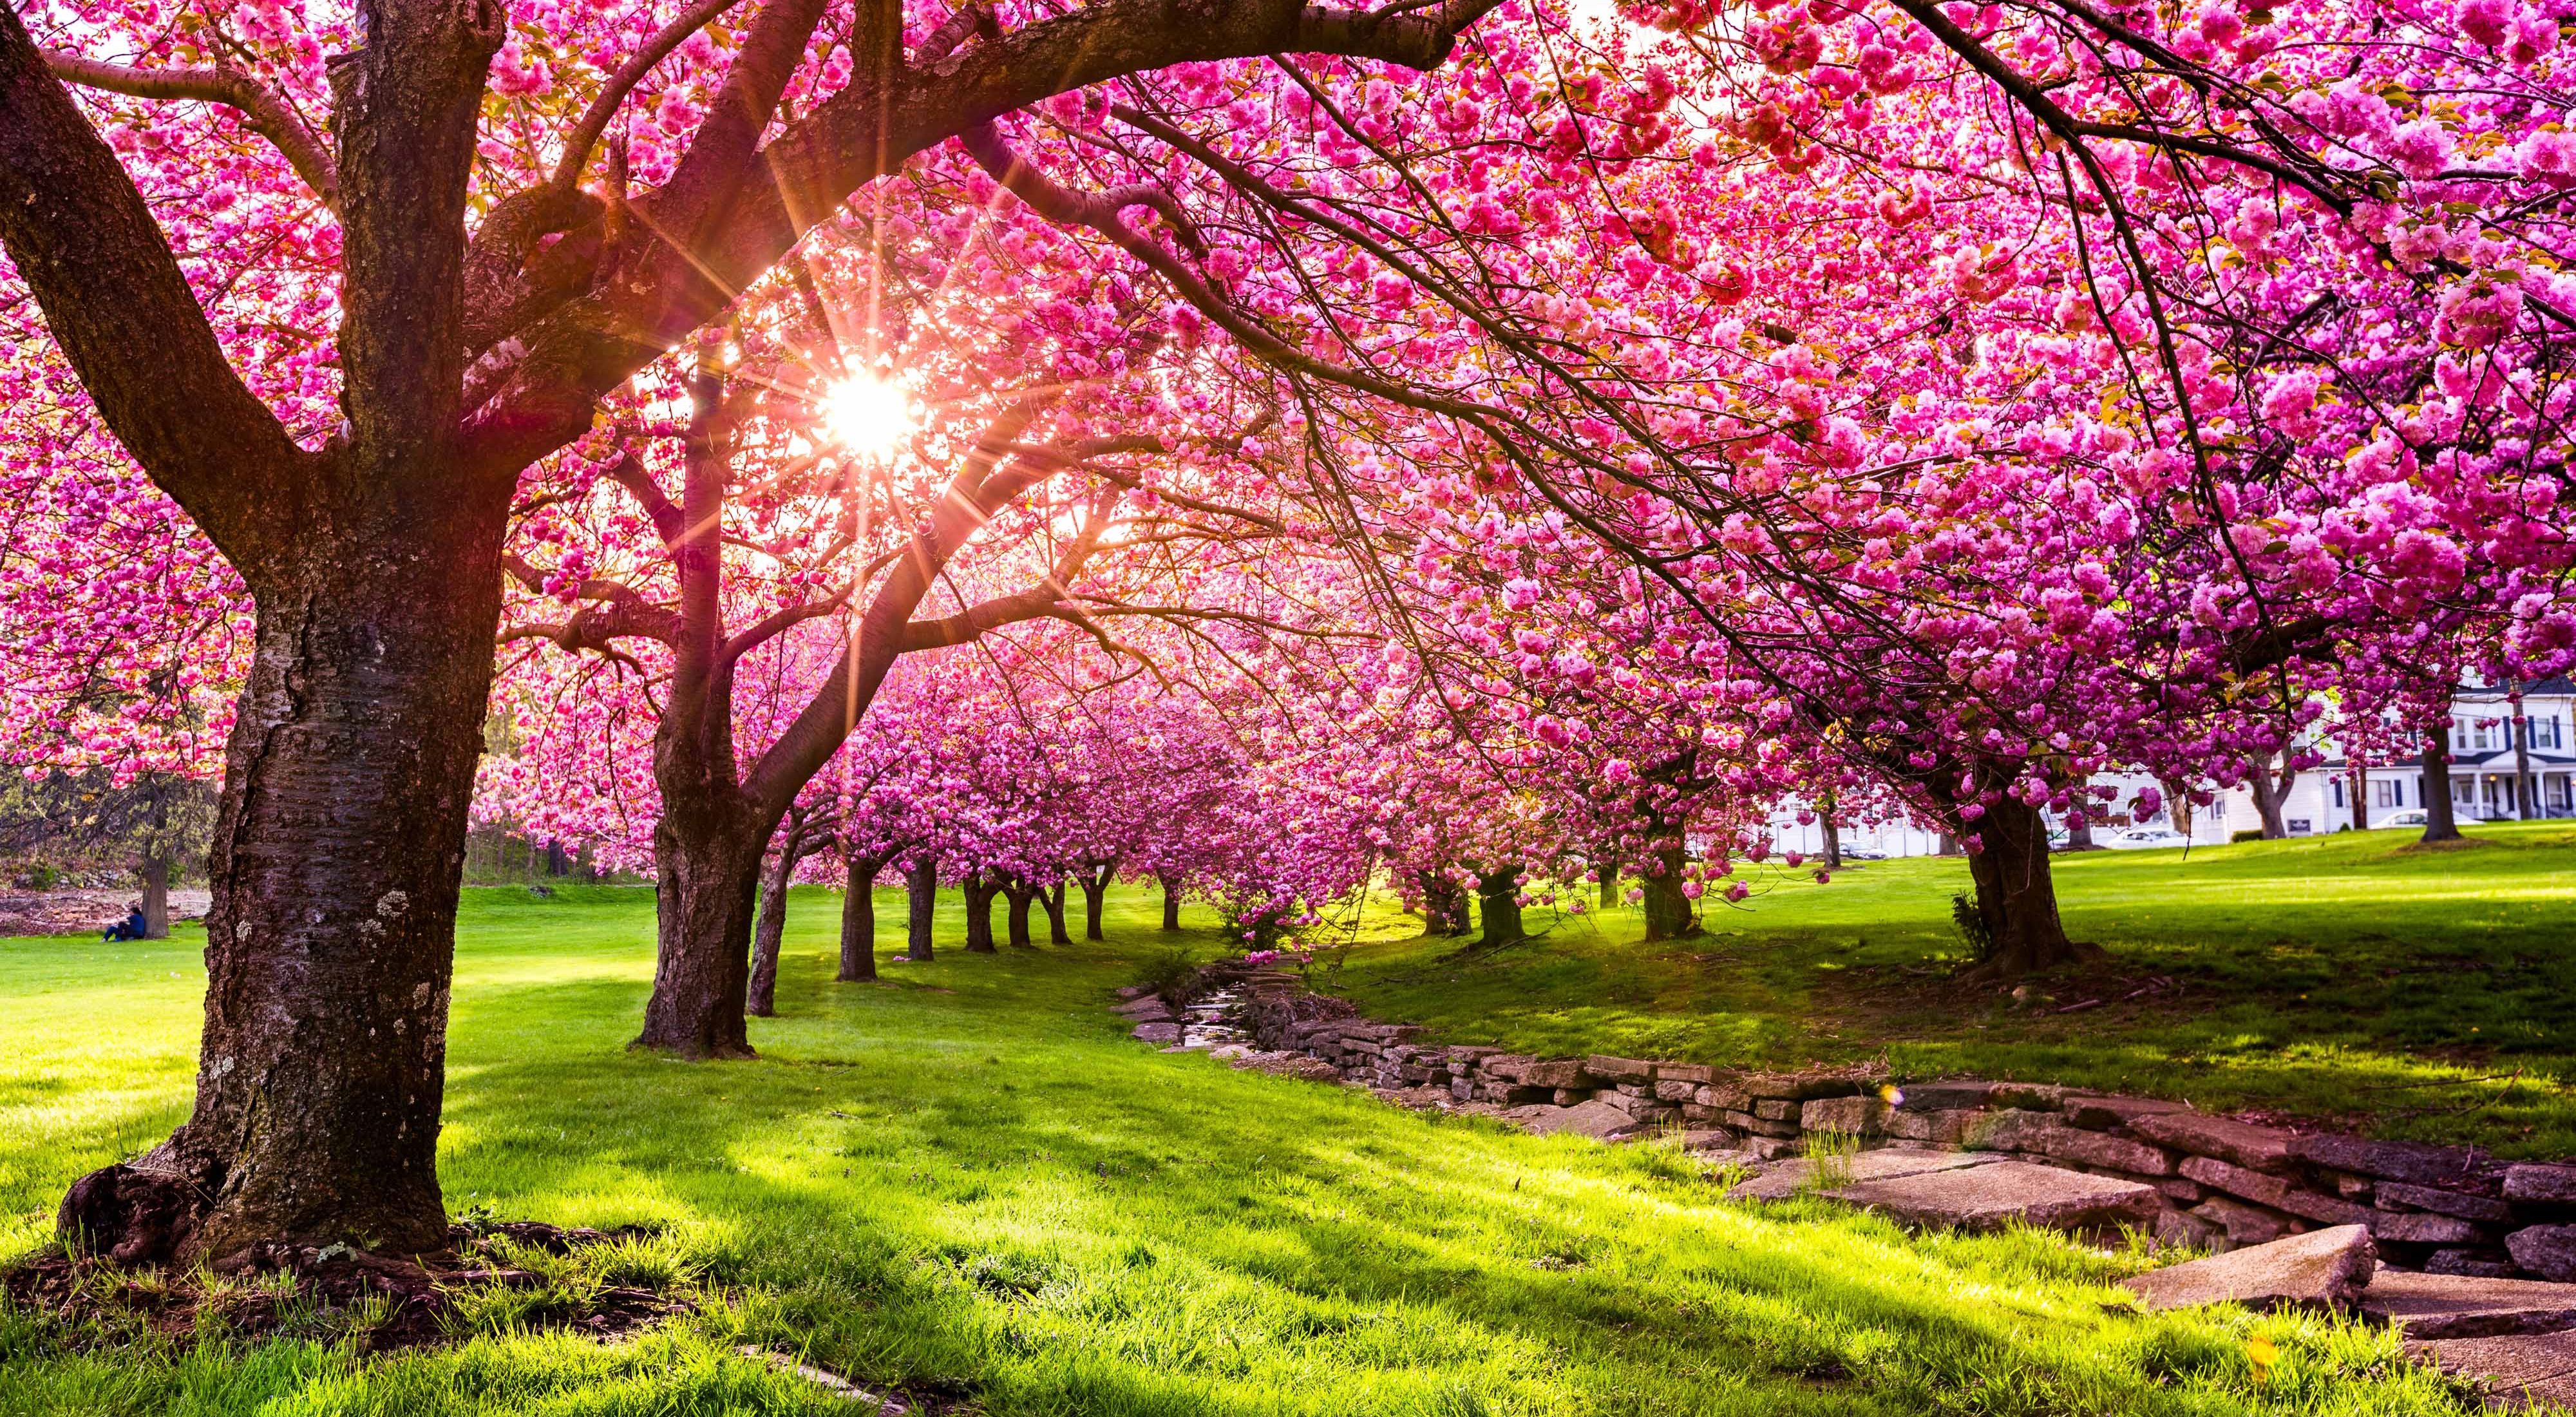 Trees with pink blossoms line a creek